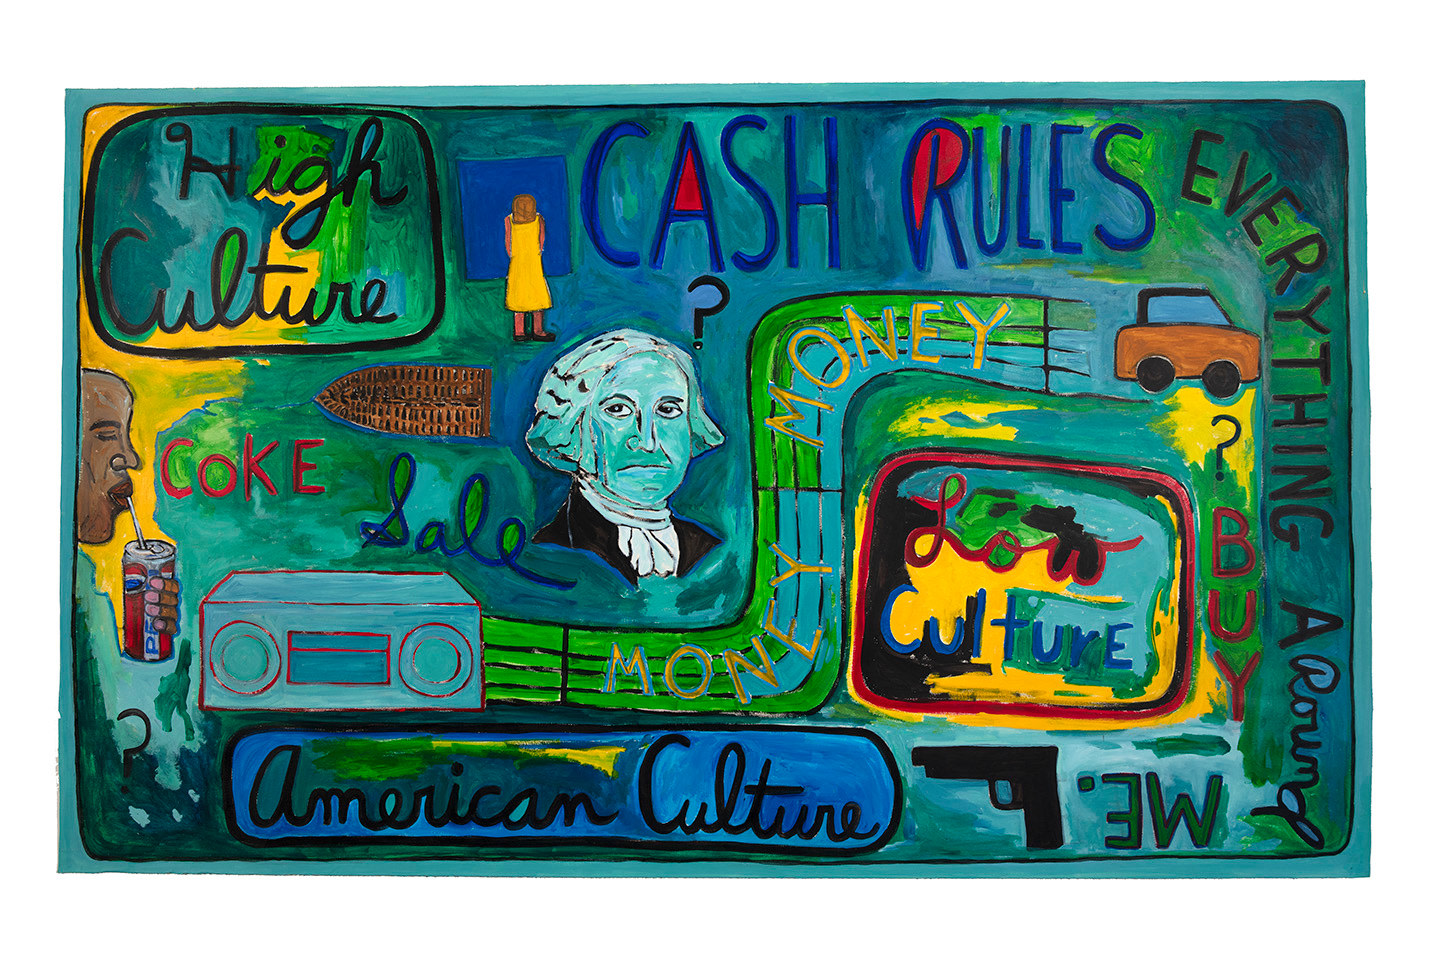 Cash Rules Everything, 1994
Mixed media on paper
51.5 x 84.75 inches